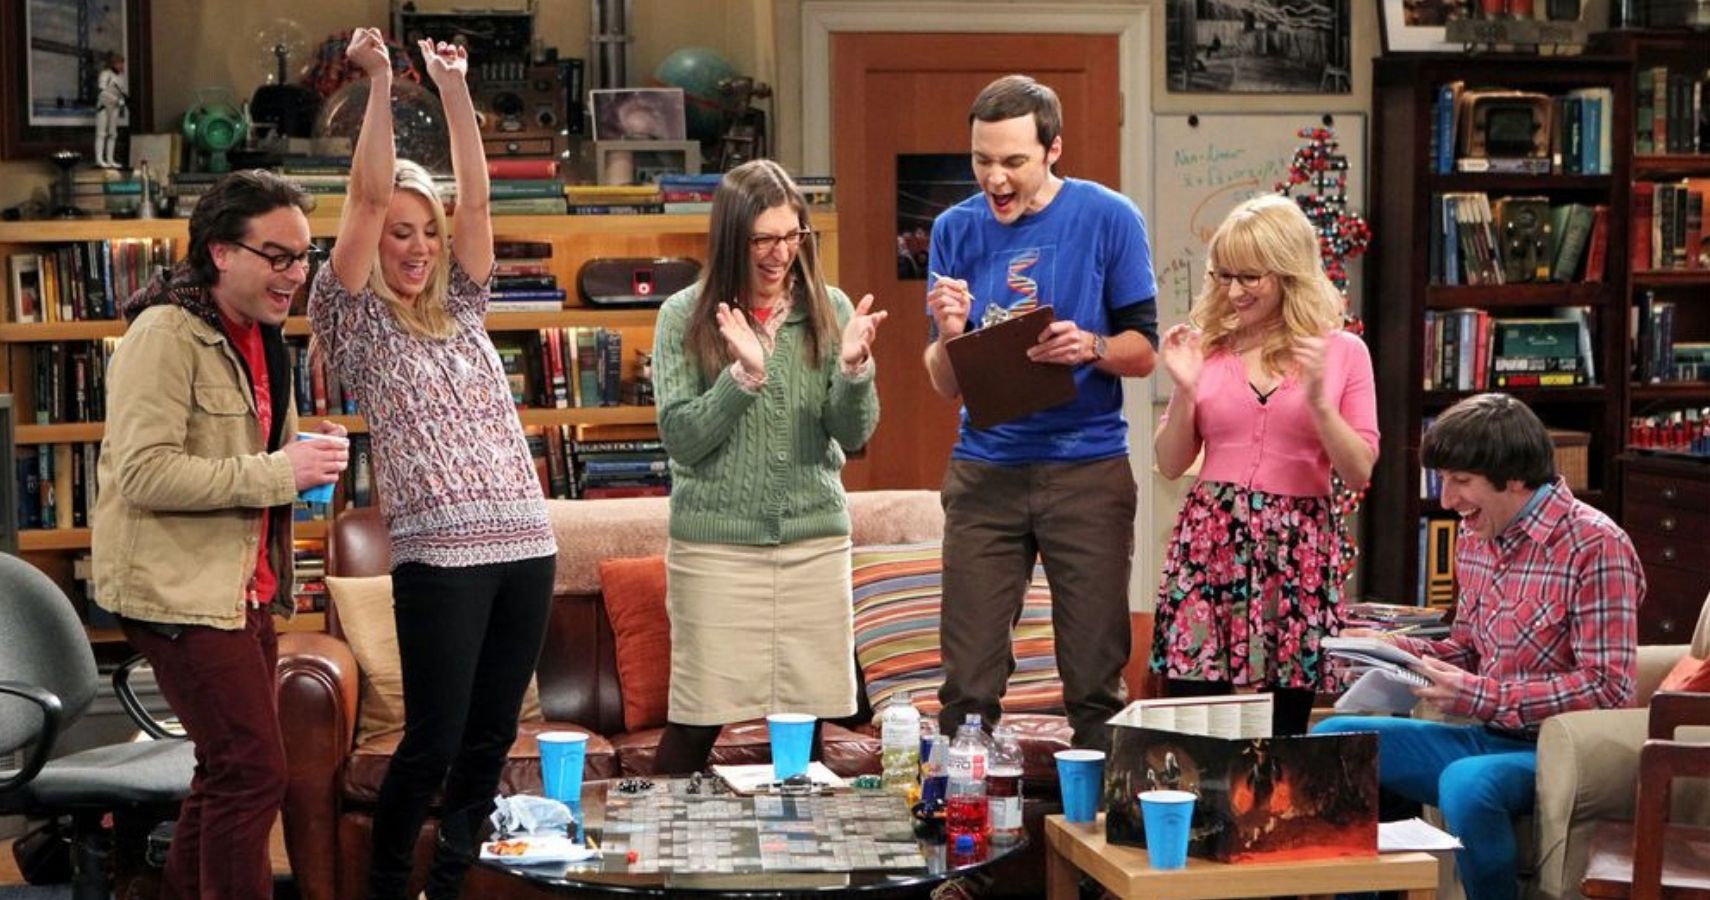 The Big Bang Theory: 10 Reasons Why Penny & Amy Aren't Real Friends